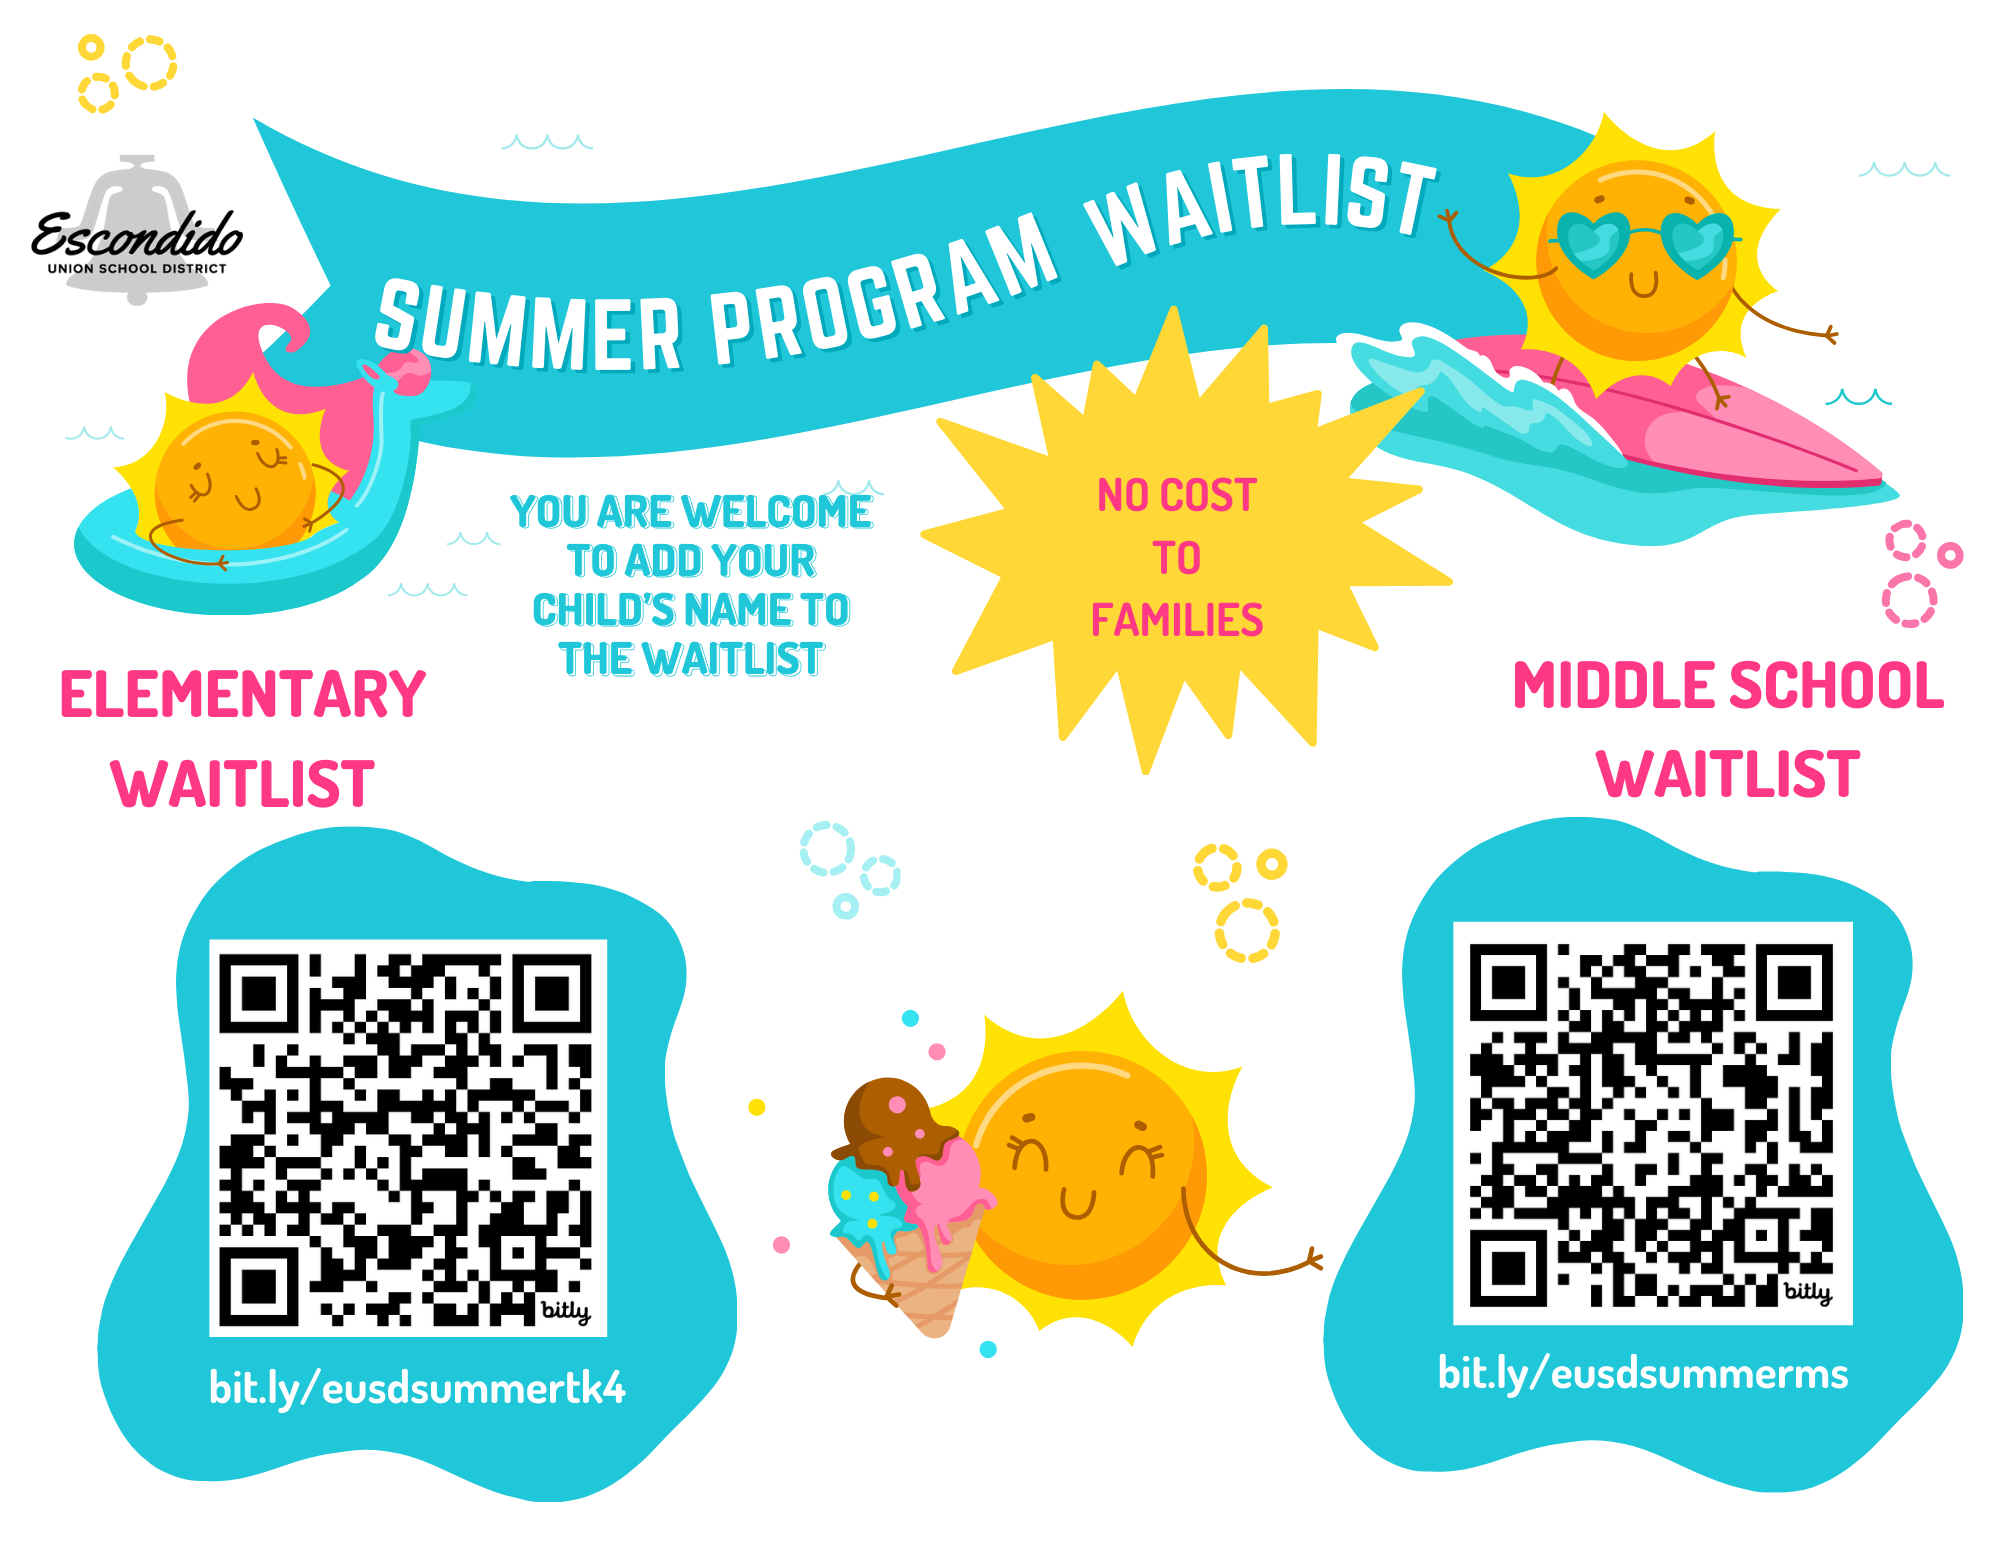 summer program waitlist flyer with qr code to complete the interest form